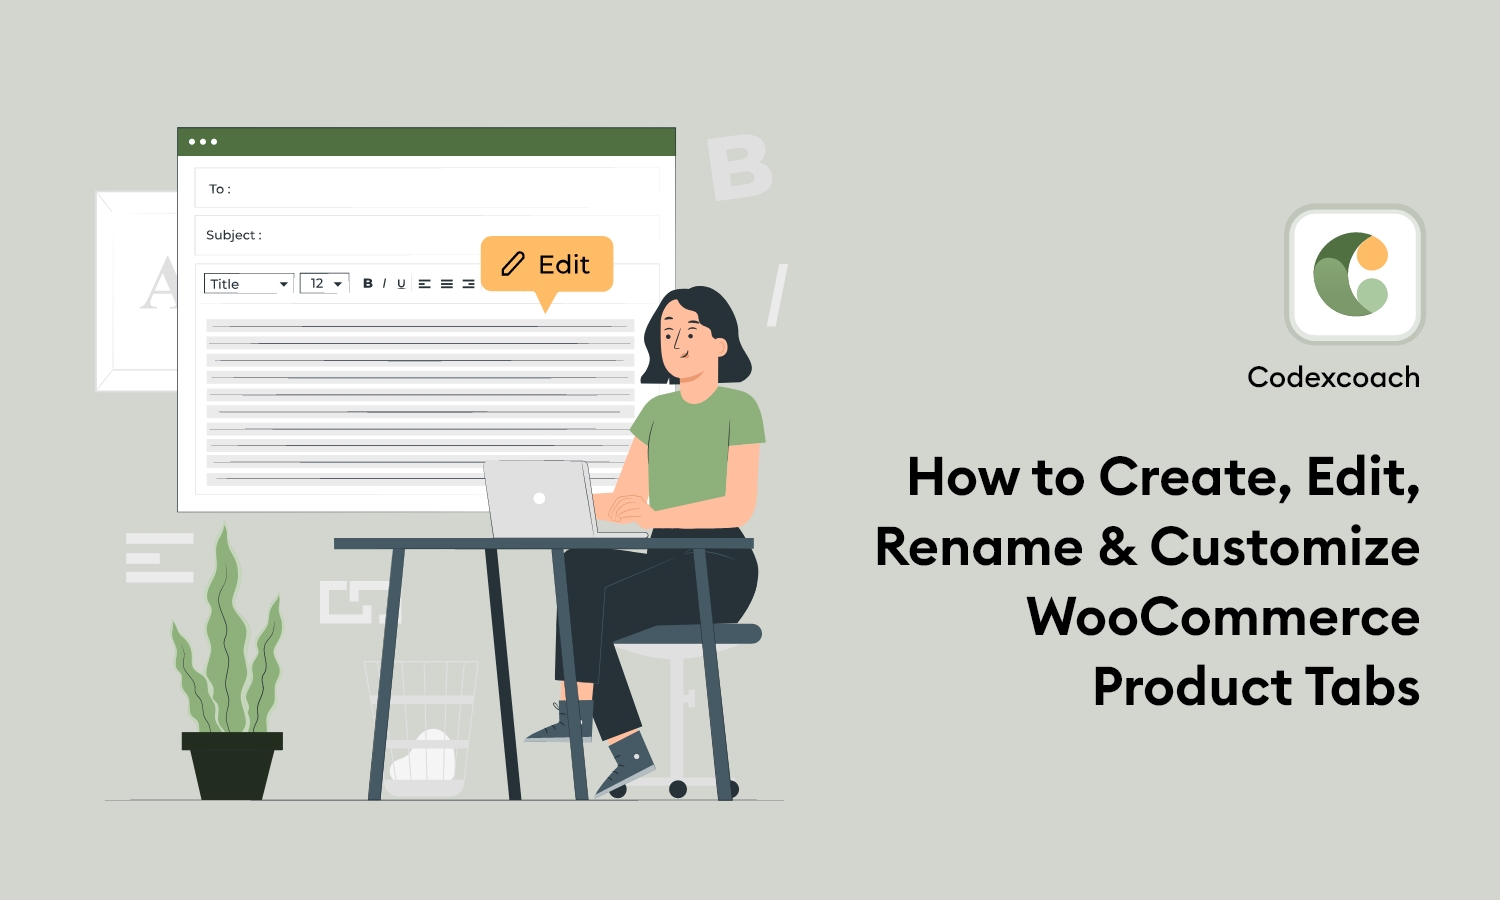 How to Create, Edit, Rename & Customize WooCommerce Product Tabs